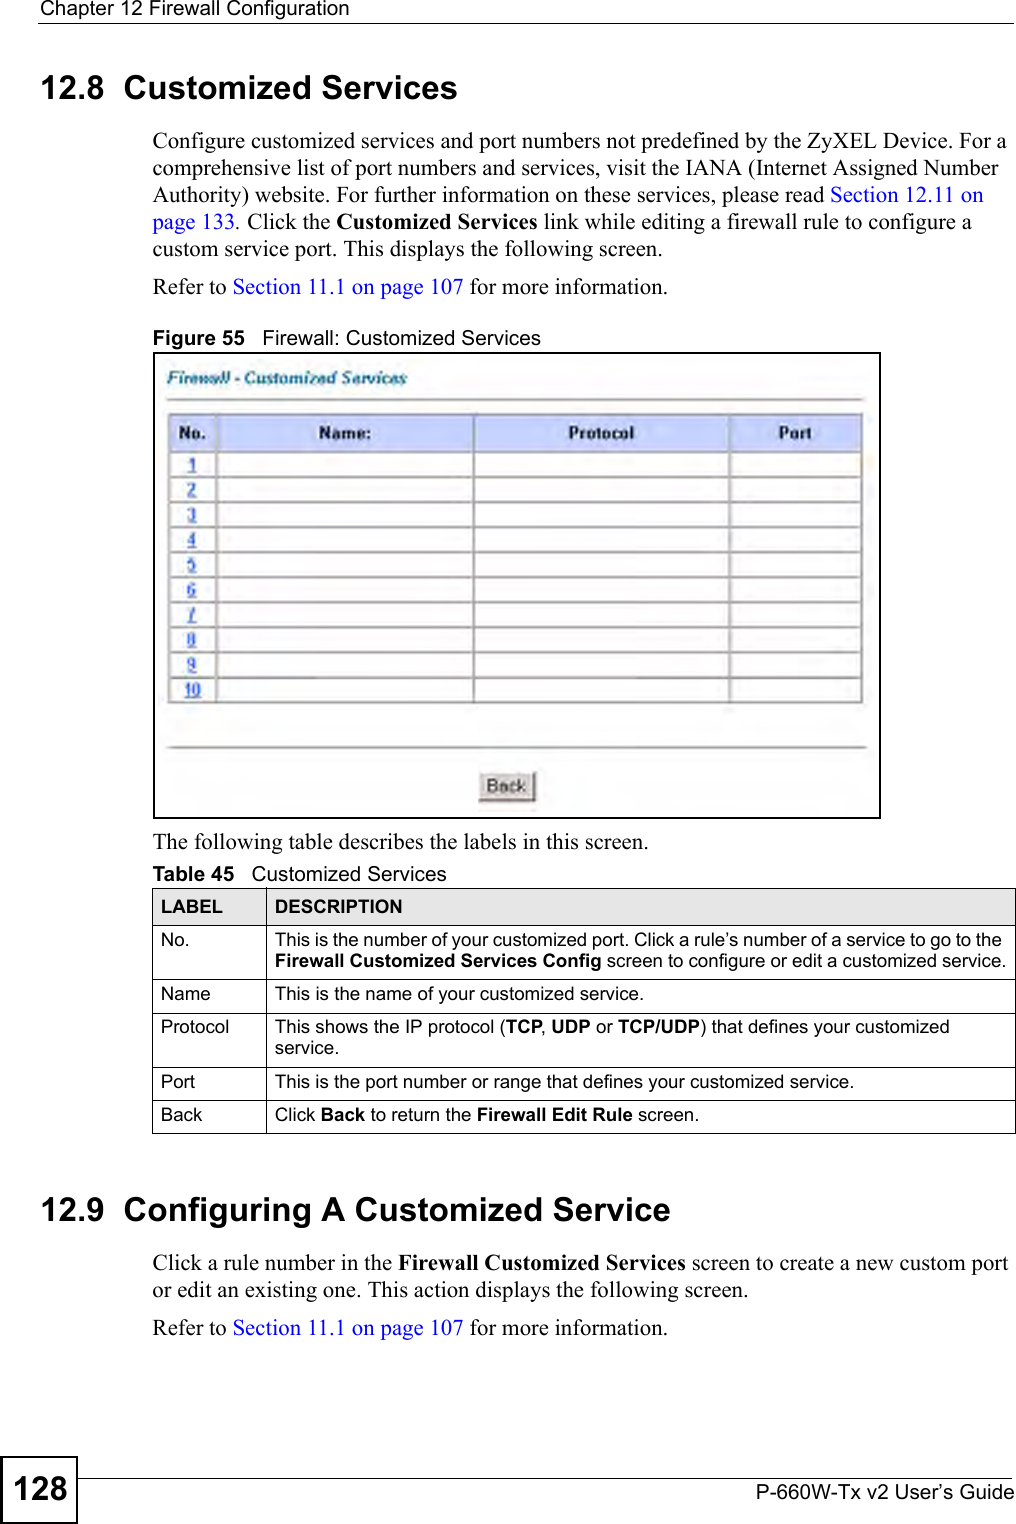 Chapter 12 Firewall ConfigurationP-660W-Tx v2 User’s Guide12812.8  Customized Services Configure customized services and port numbers not predefined by the ZyXEL Device. For a comprehensive list of port numbers and services, visit the IANA (Internet Assigned Number Authority) website. For further information on these services, please read Section 12.11 on page 133. Click the Customized Services link while editing a firewall rule to configure a custom service port. This displays the following screen.Refer to Section 11.1 on page 107 for more information. Figure 55   Firewall: Customized ServicesThe following table describes the labels in this screen. 12.9  Configuring A Customized Service Click a rule number in the Firewall Customized Services screen to create a new custom port or edit an existing one. This action displays the following screen.Refer to Section 11.1 on page 107 for more information. Table 45   Customized ServicesLABEL DESCRIPTIONNo. This is the number of your customized port. Click a rule’s number of a service to go to the Firewall Customized Services Config screen to configure or edit a customized service.Name This is the name of your customized service.Protocol This shows the IP protocol (TCP, UDP or TCP/UDP) that defines your customized service.Port This is the port number or range that defines your customized service.Back Click Back to return the Firewall Edit Rule screen.